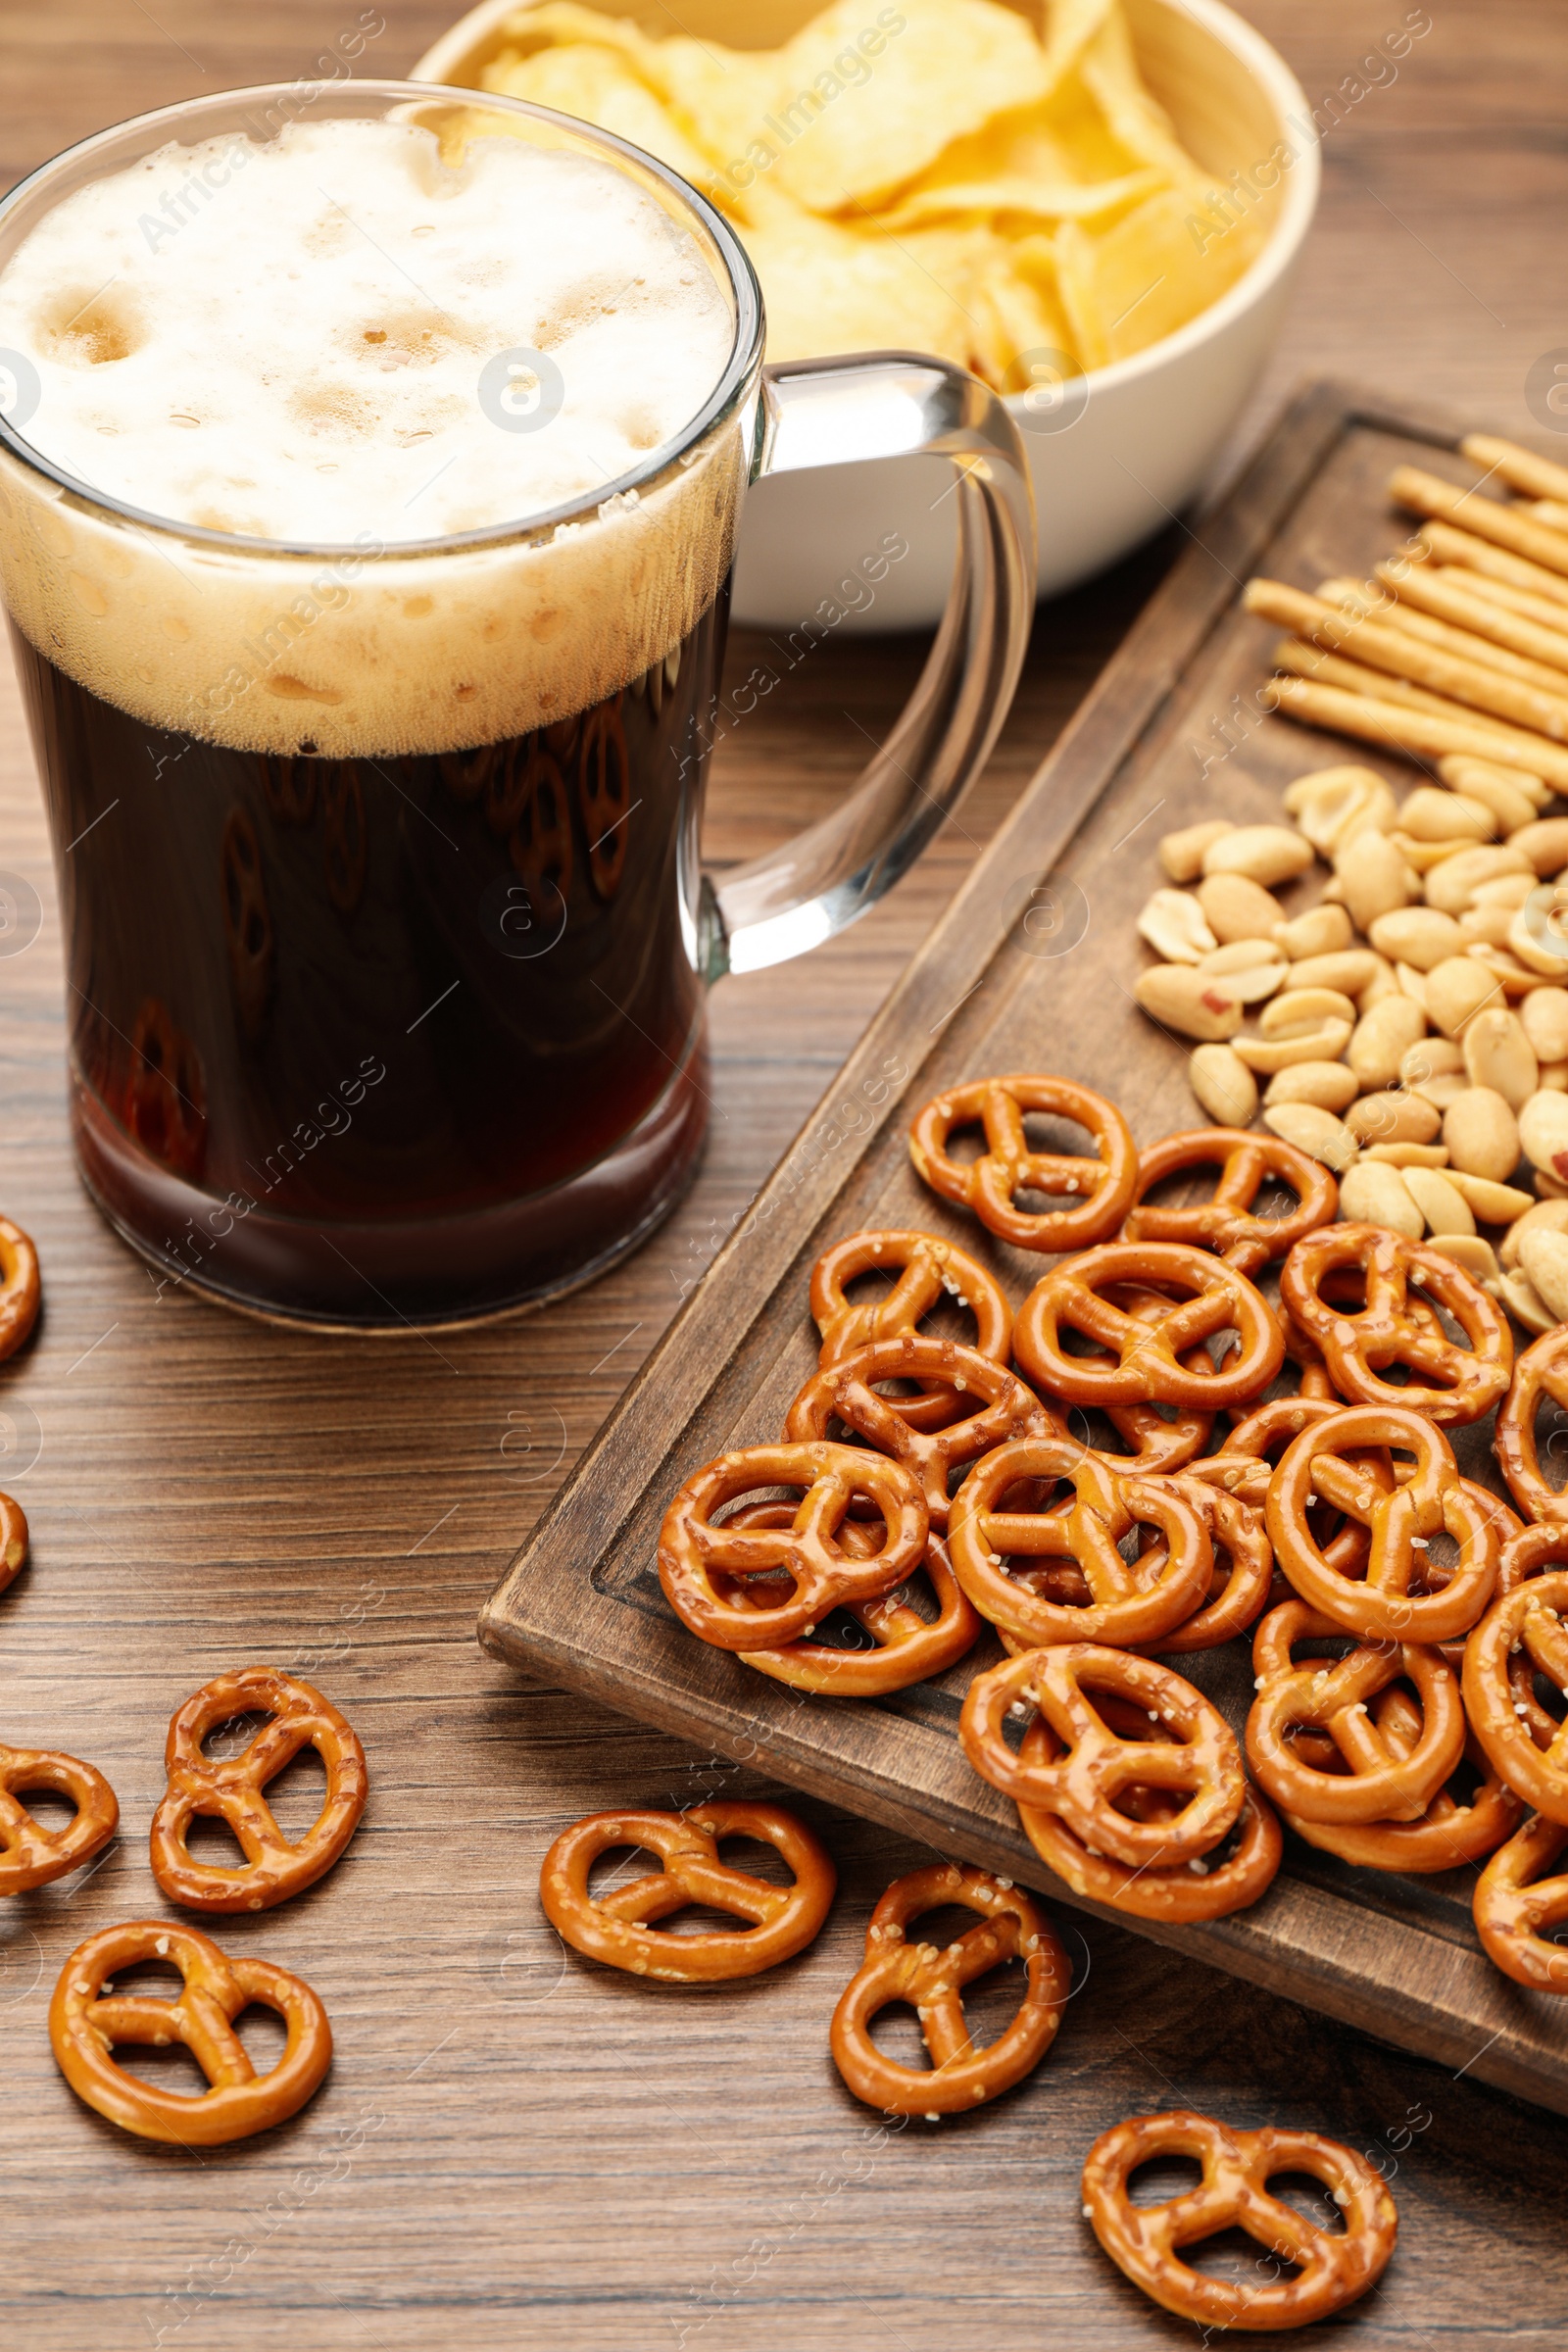 Photo of Glass of beer served with delicious pretzel crackers and other snacks on wooden table